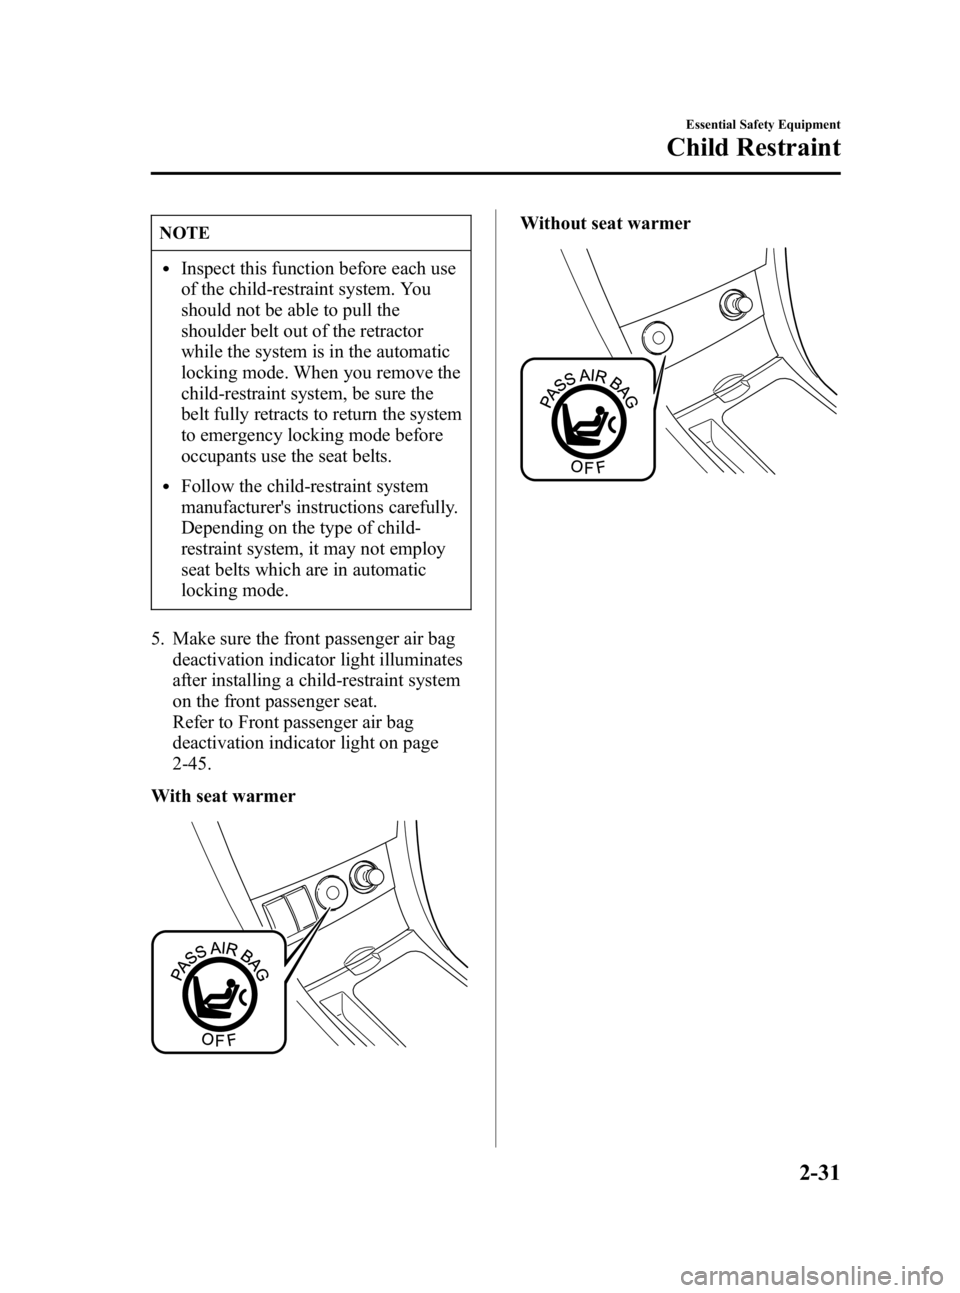 MAZDA MODEL 3 5-DOOR 2006 Service Manual Black plate (45,1)
NOTE
lInspect this function before each use
of the child-restraint system. You
should not be able to pull the
shoulder belt out of the retractor
while the system is in the automatic